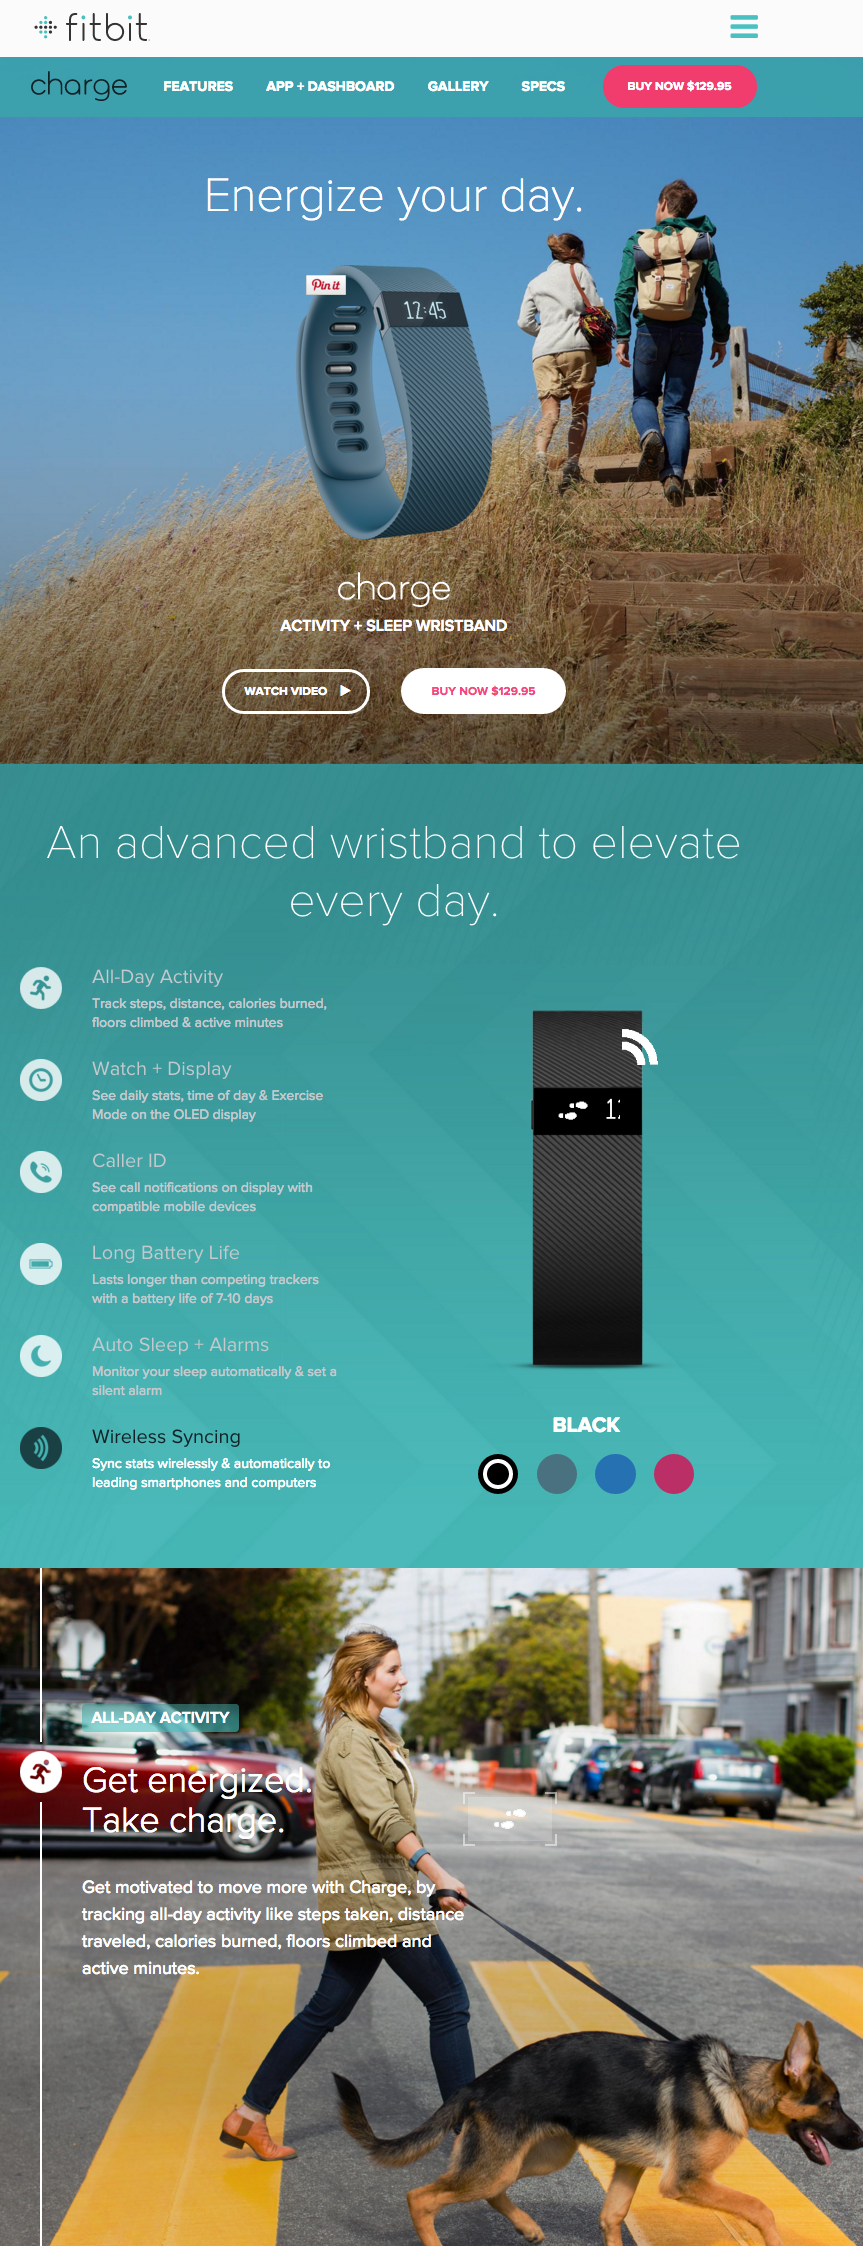 fitbit-charge-product-page.png